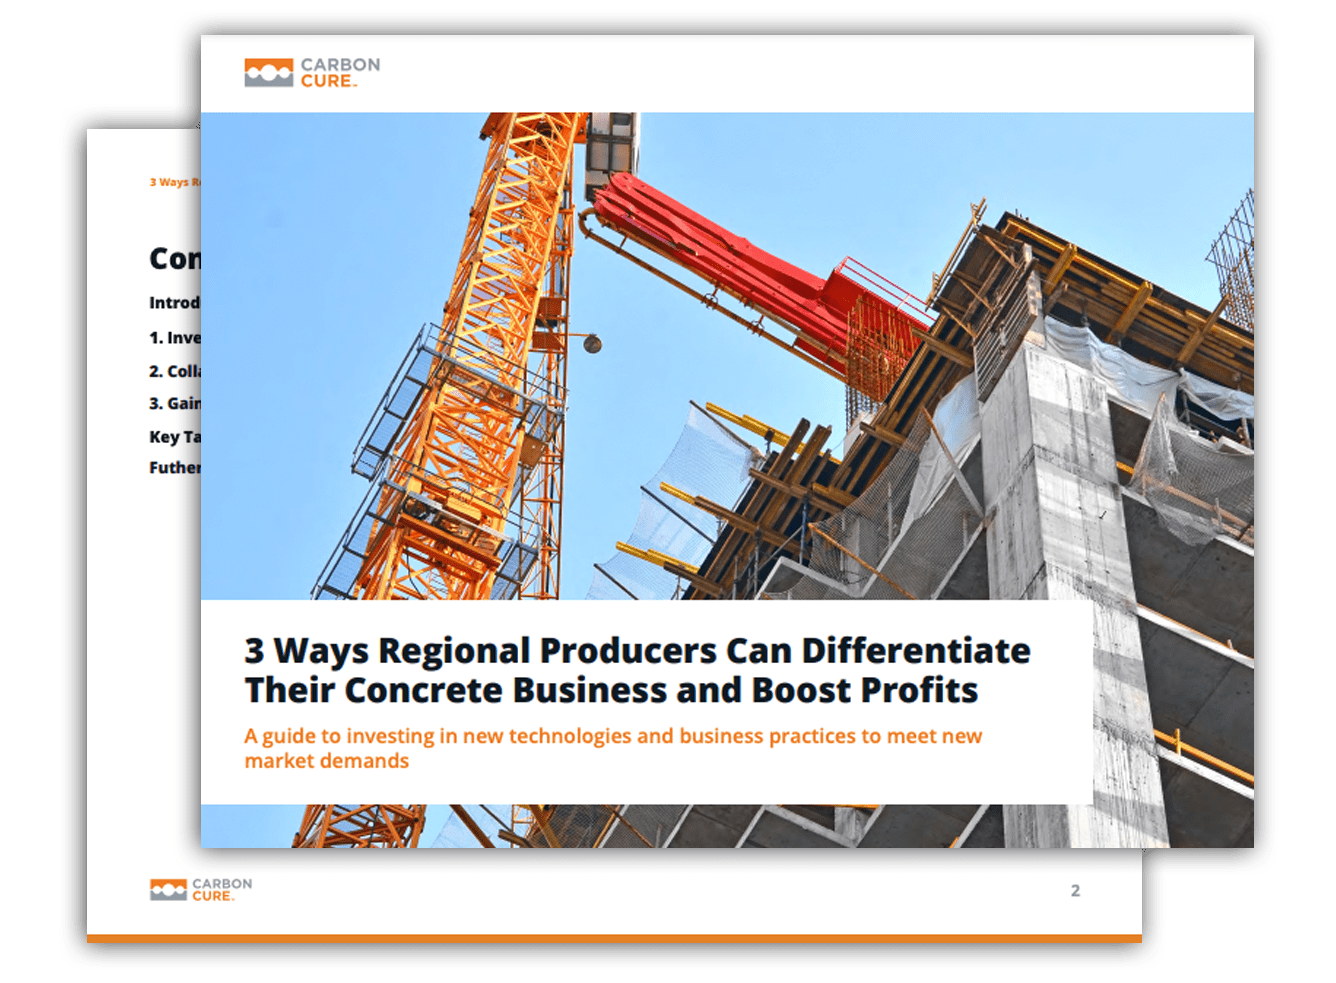 3 Ways Regional Producers Can Differentiate Their Concrete Business and Boost Profits